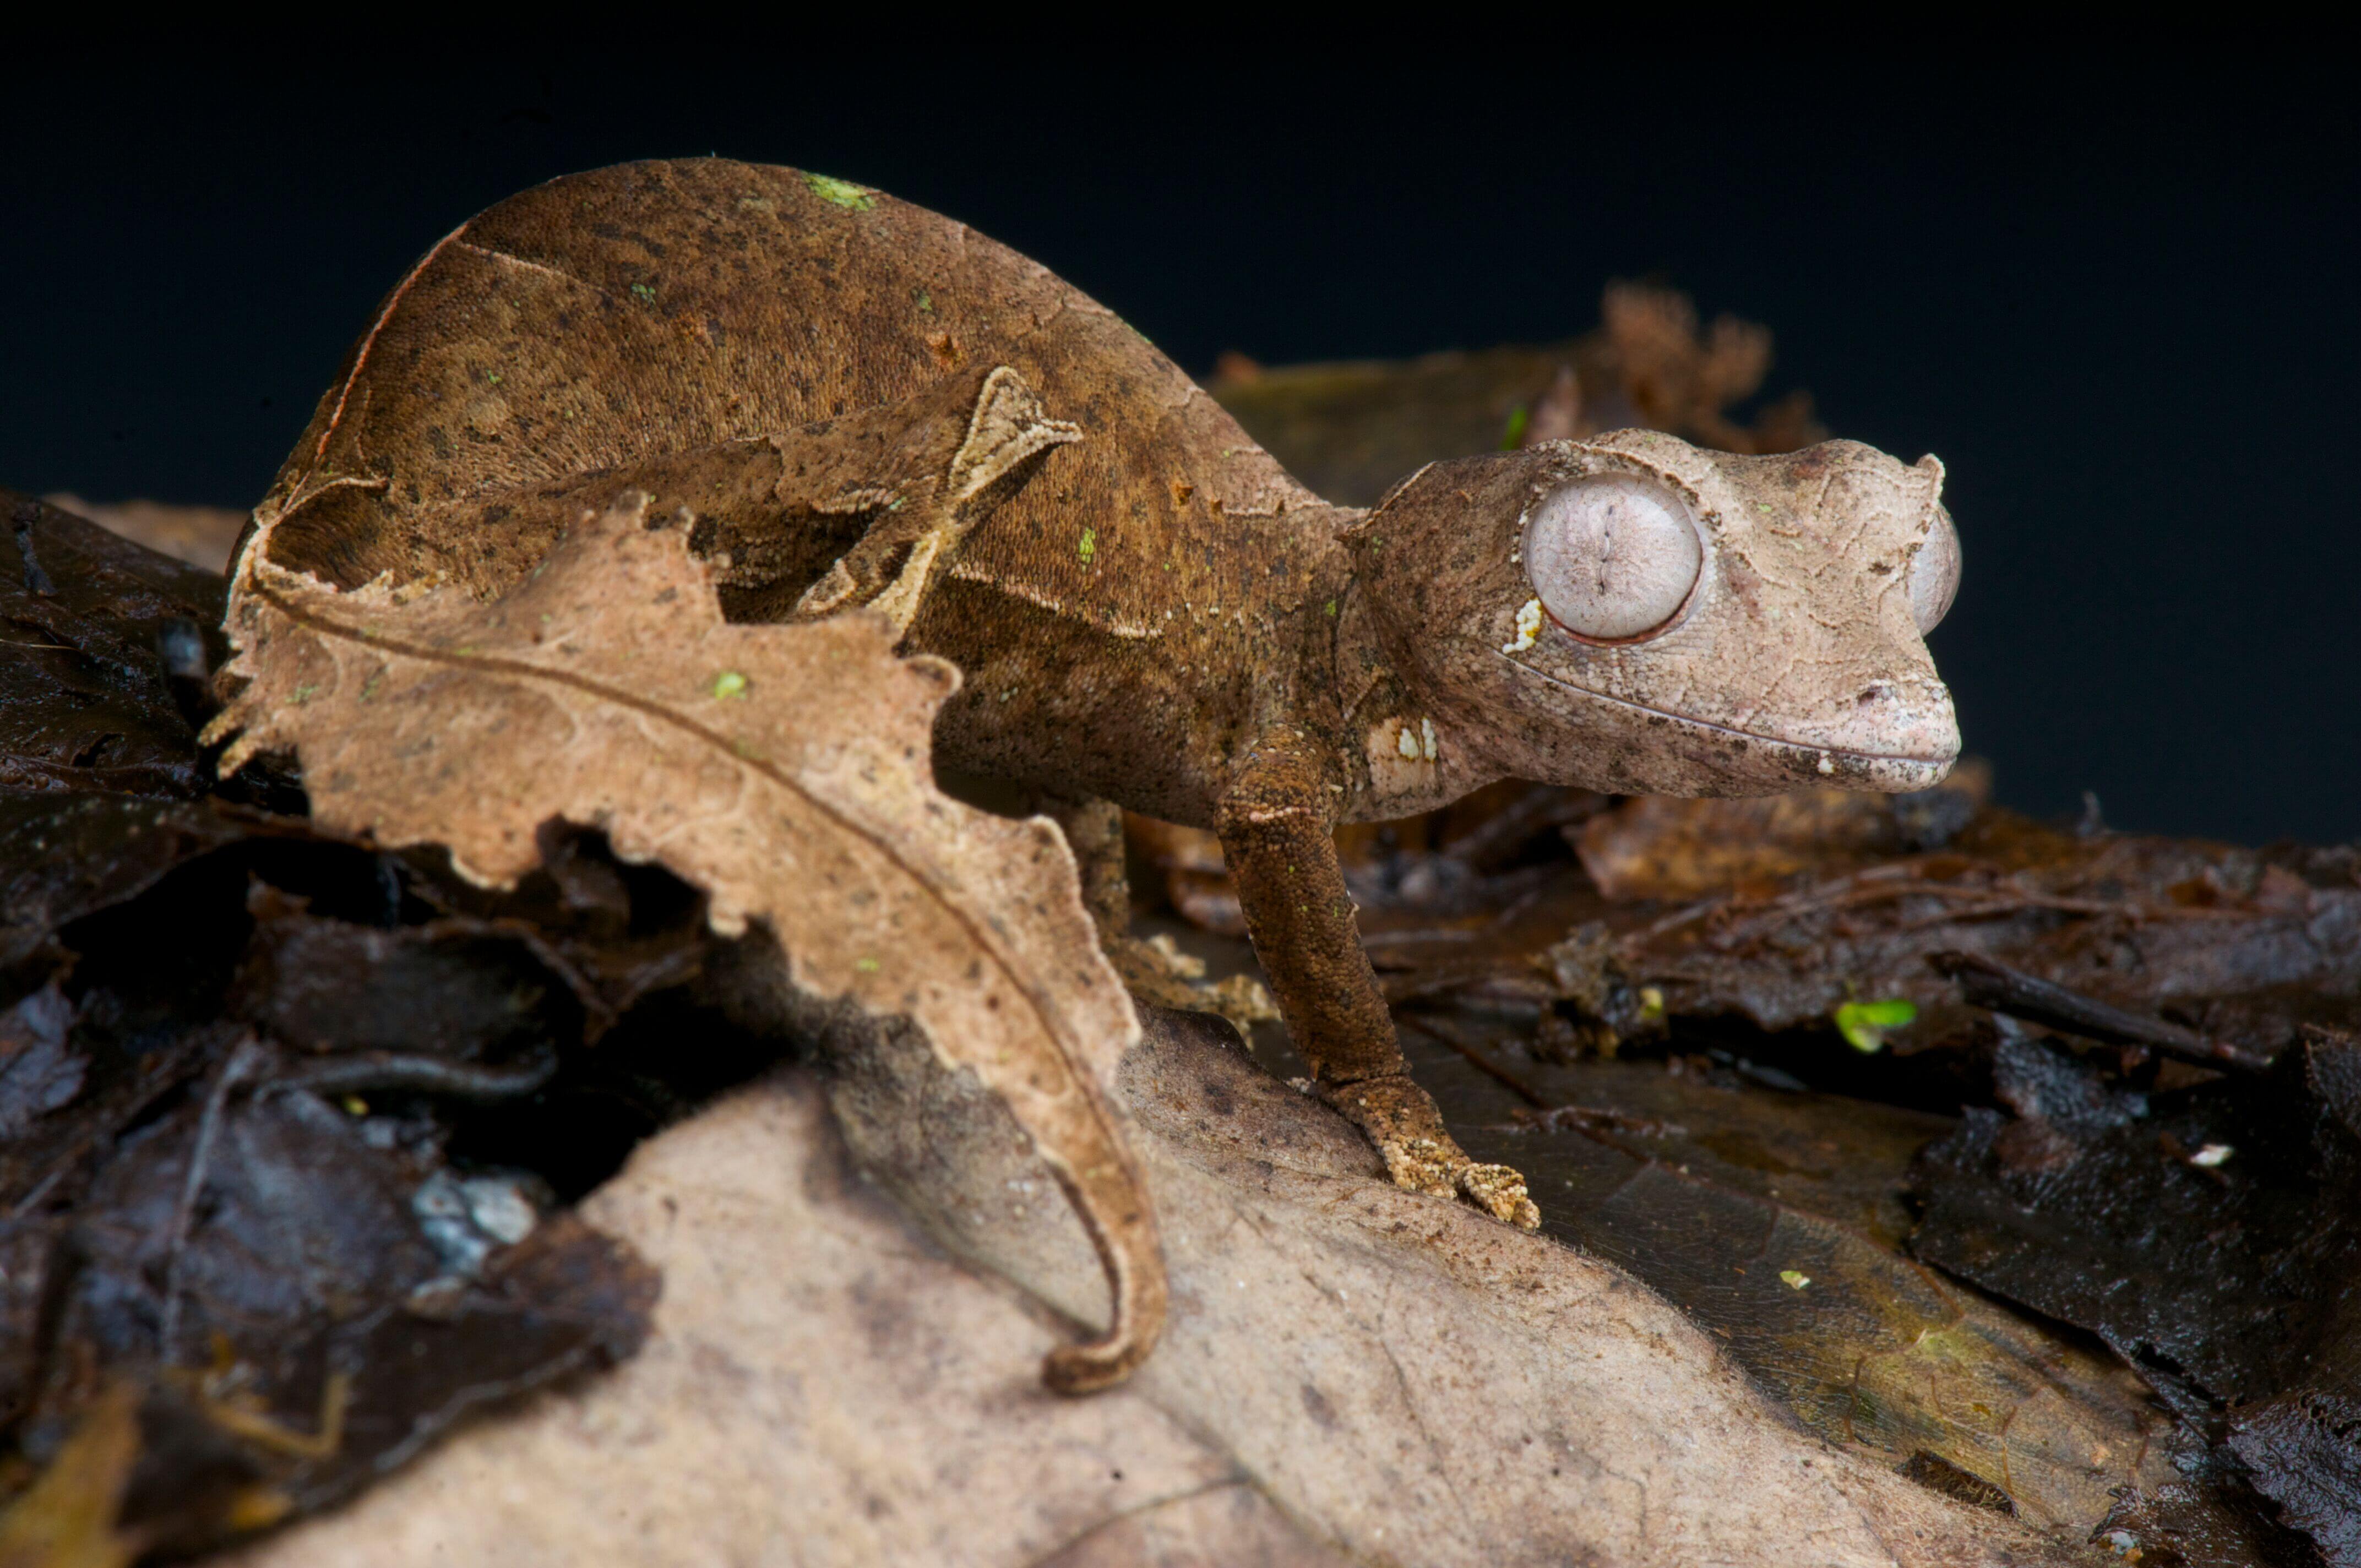 The Satanic Leaf-Tailed Gecko and his wanted beauty